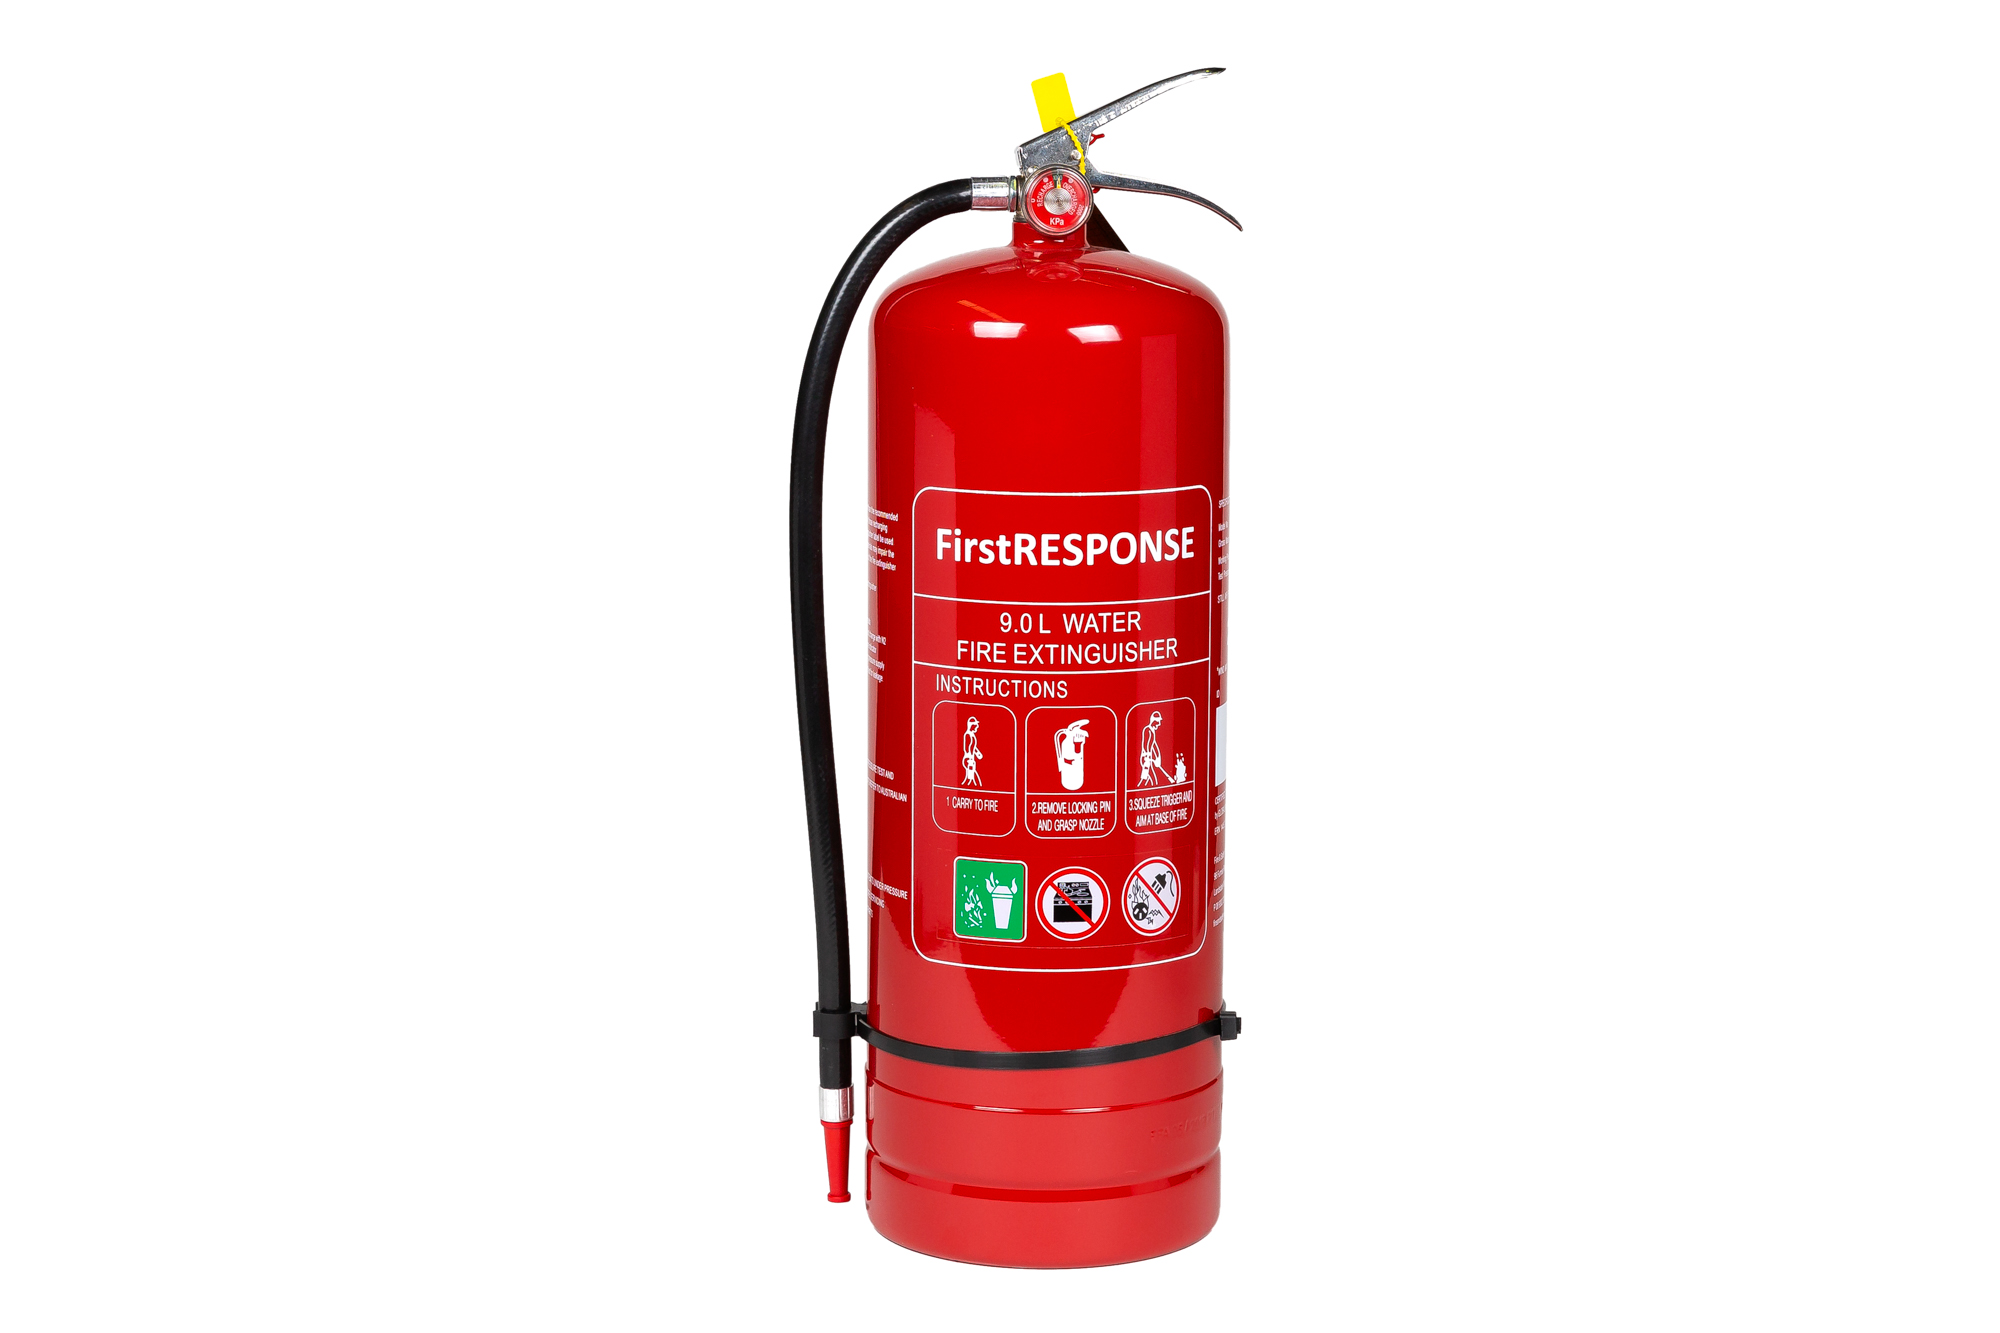 9-0l-water-fire-extinguisher-fire-safety-wa